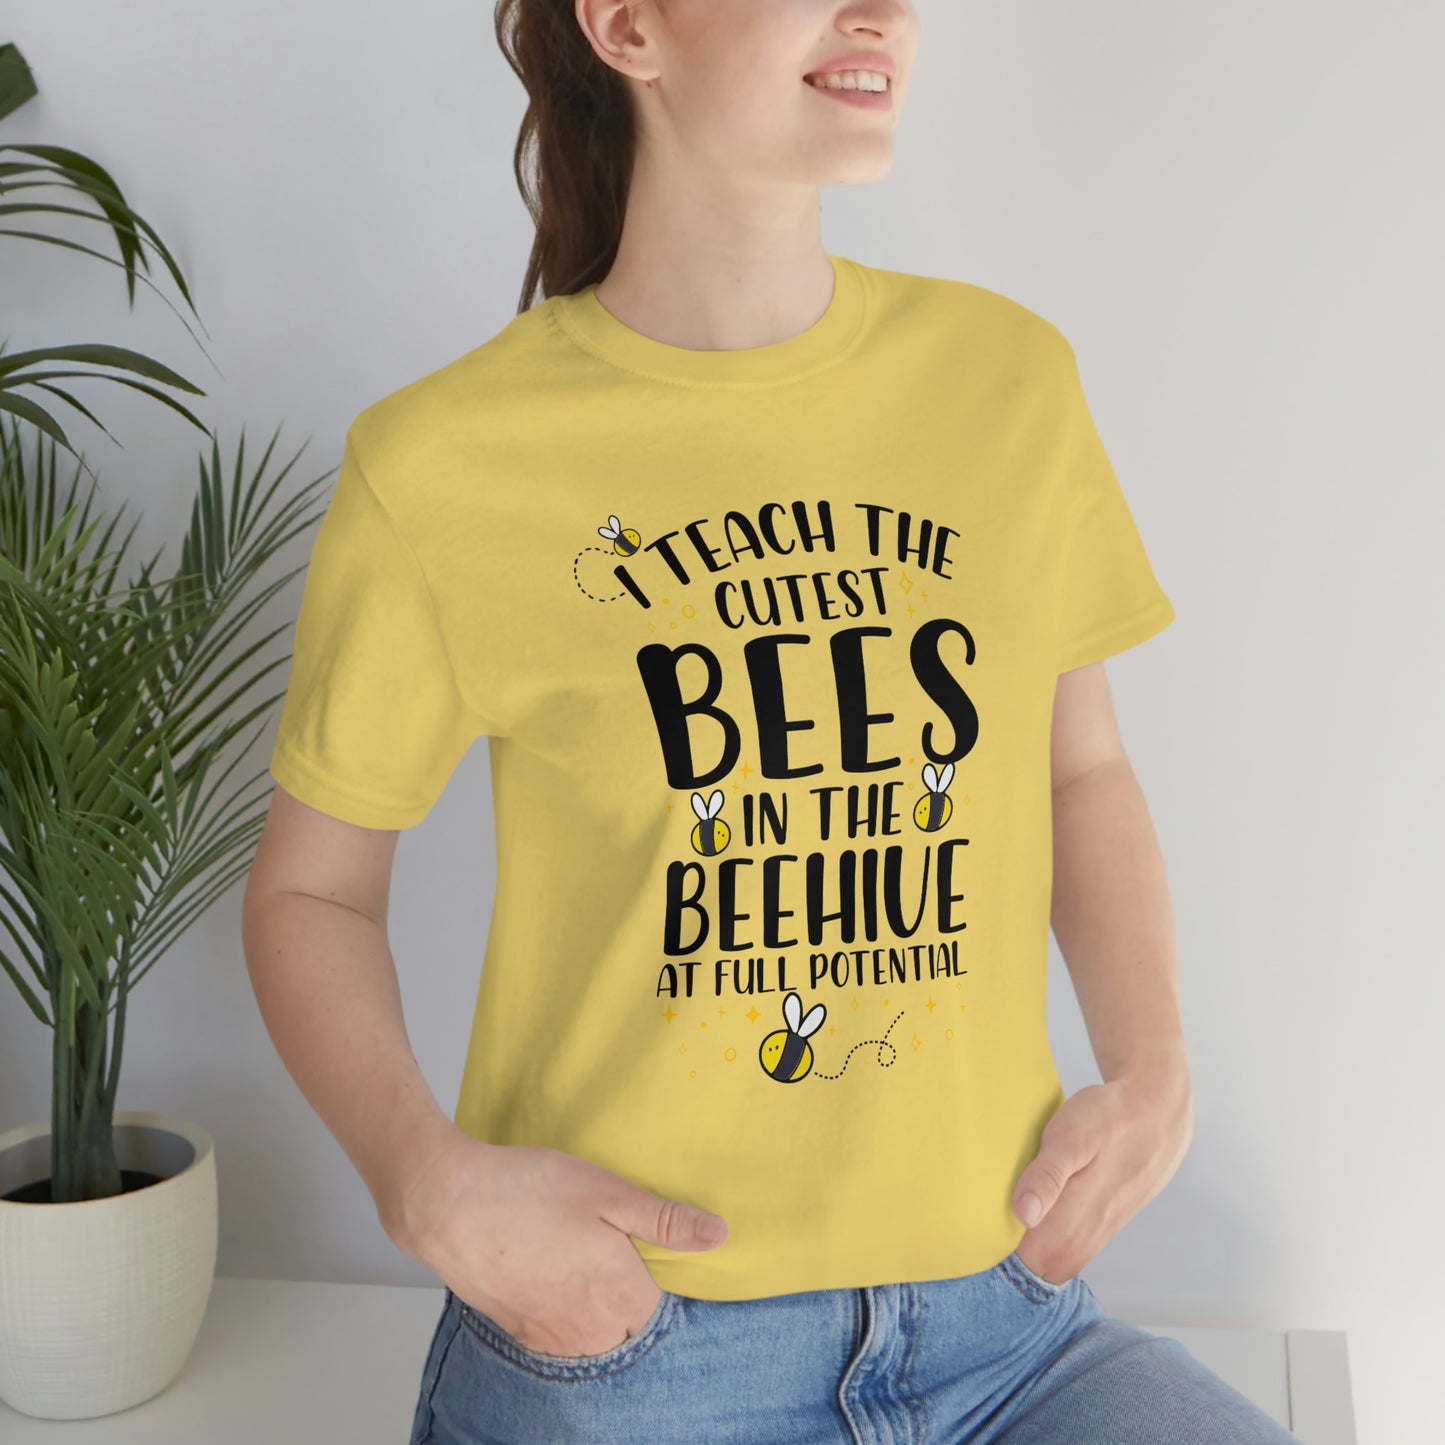 Full Potential Cutest Bees Style 6